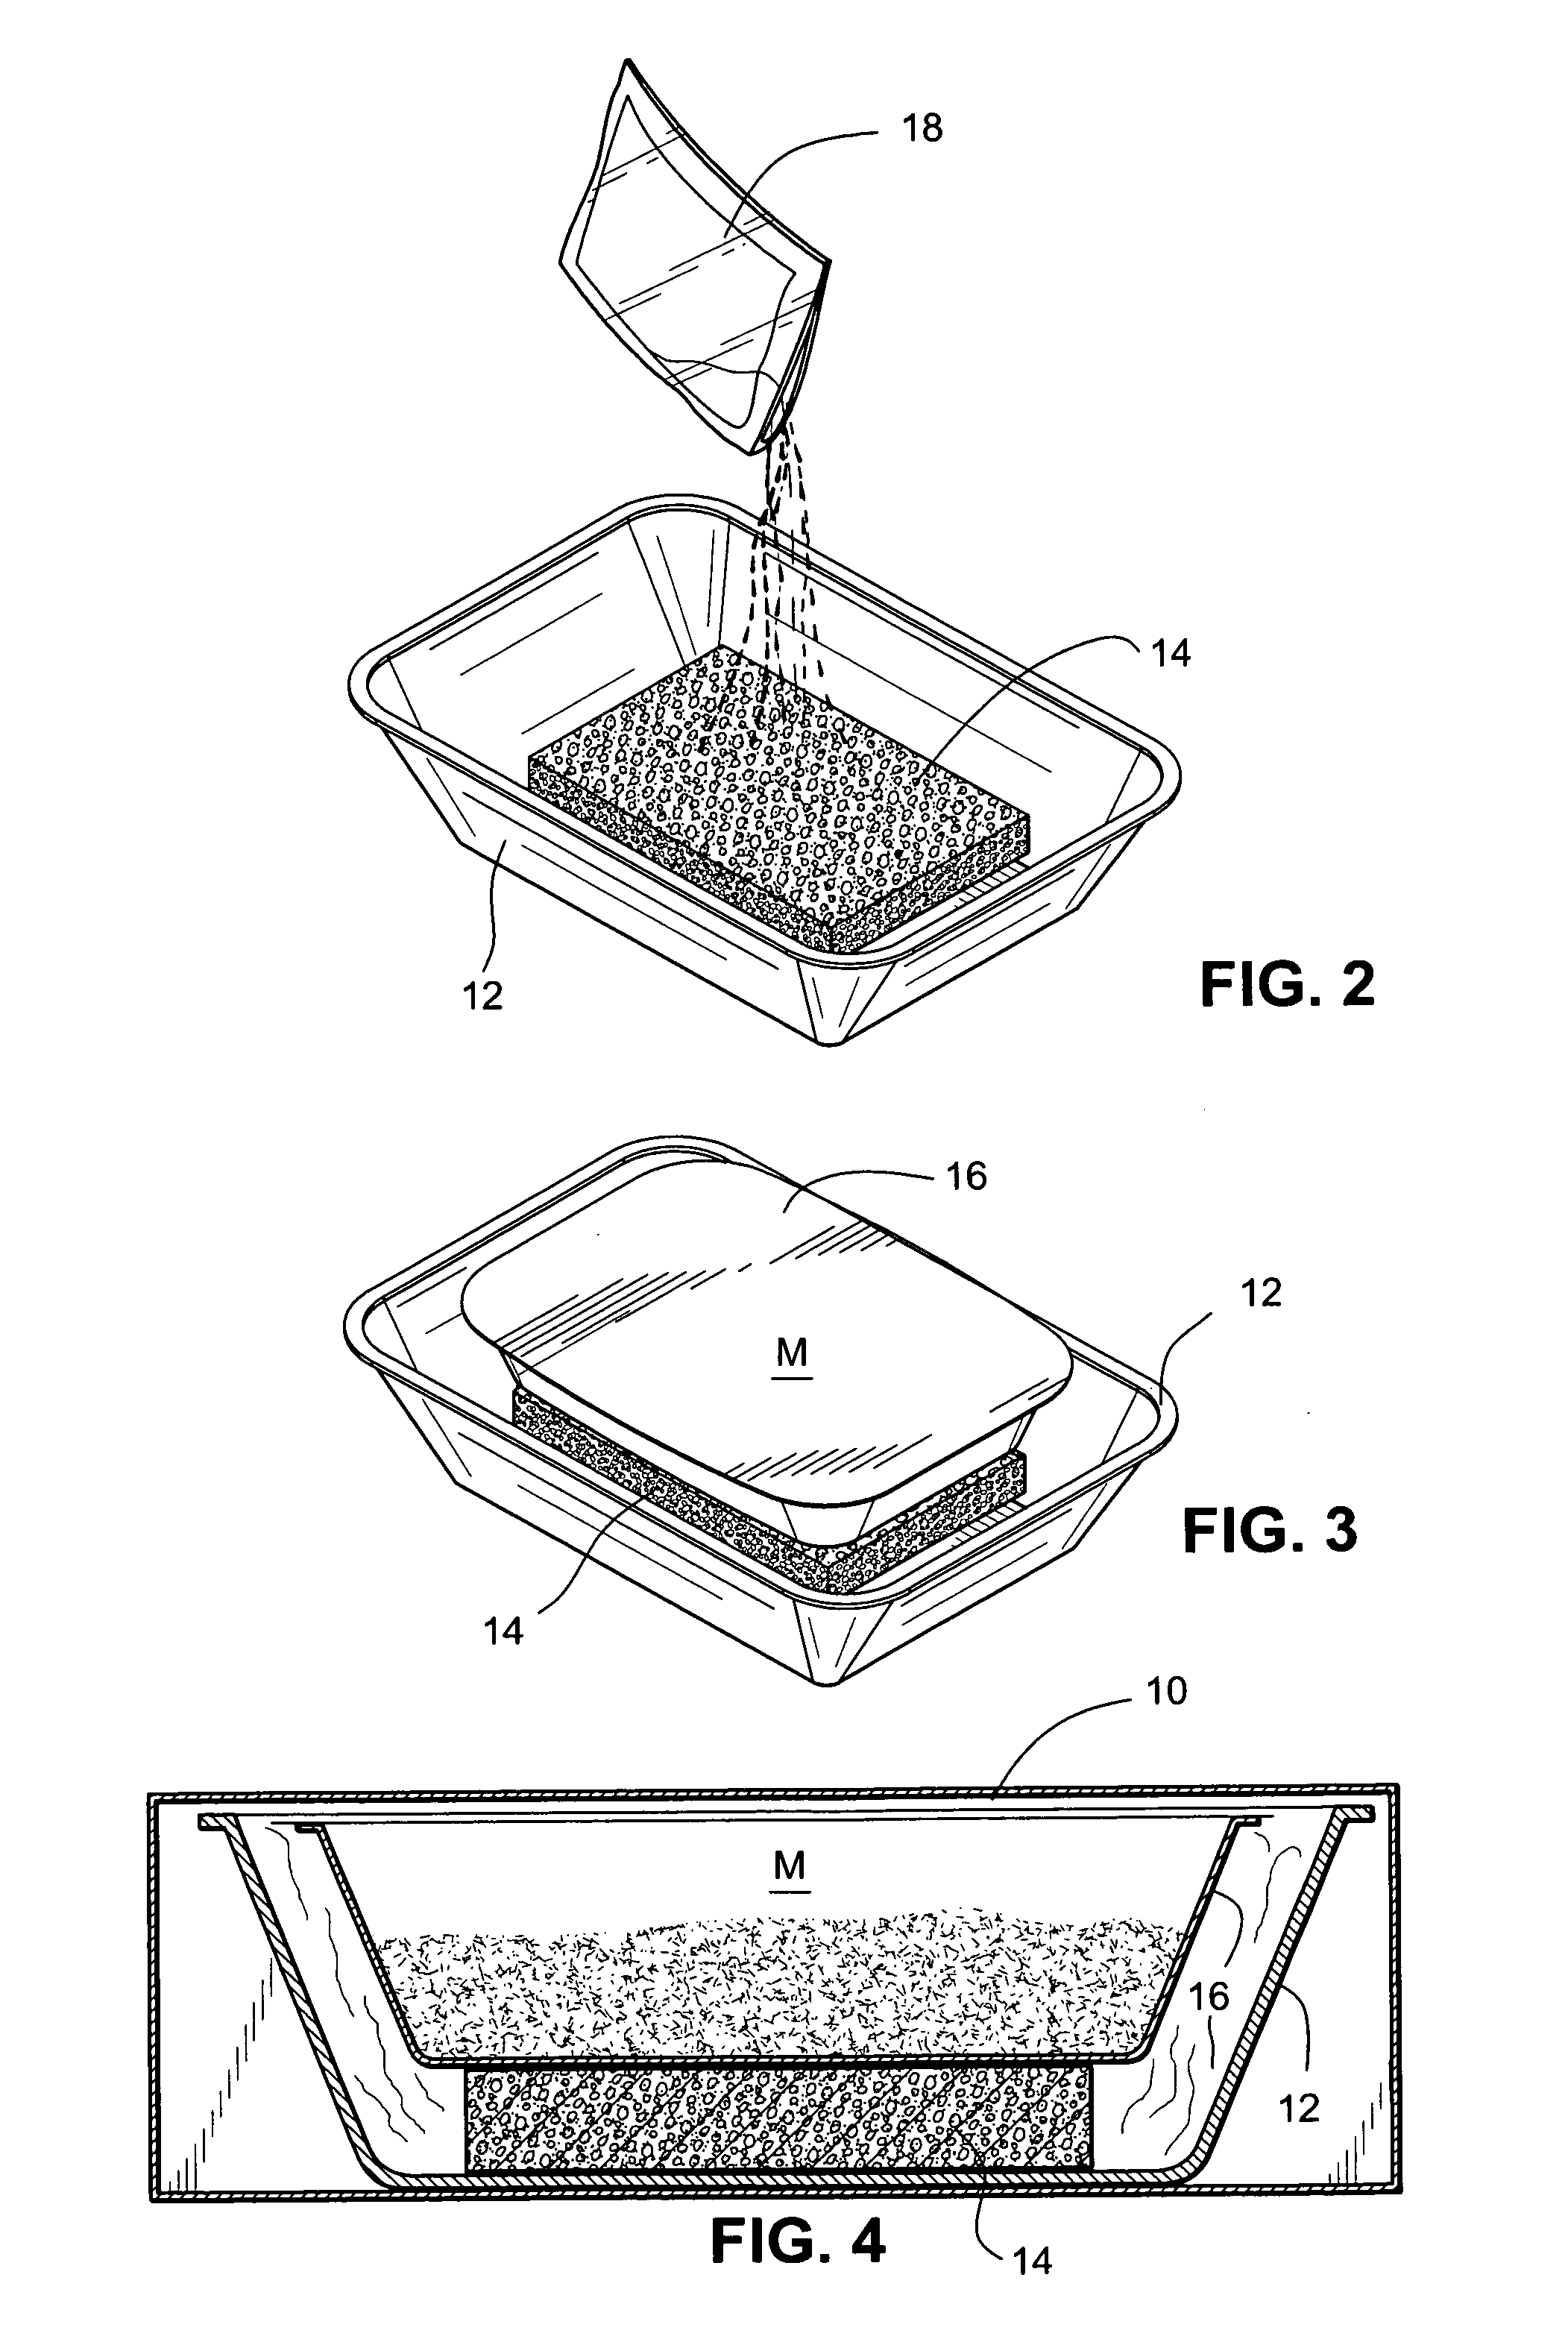 Self-contained and self-heating food, meal and drink package